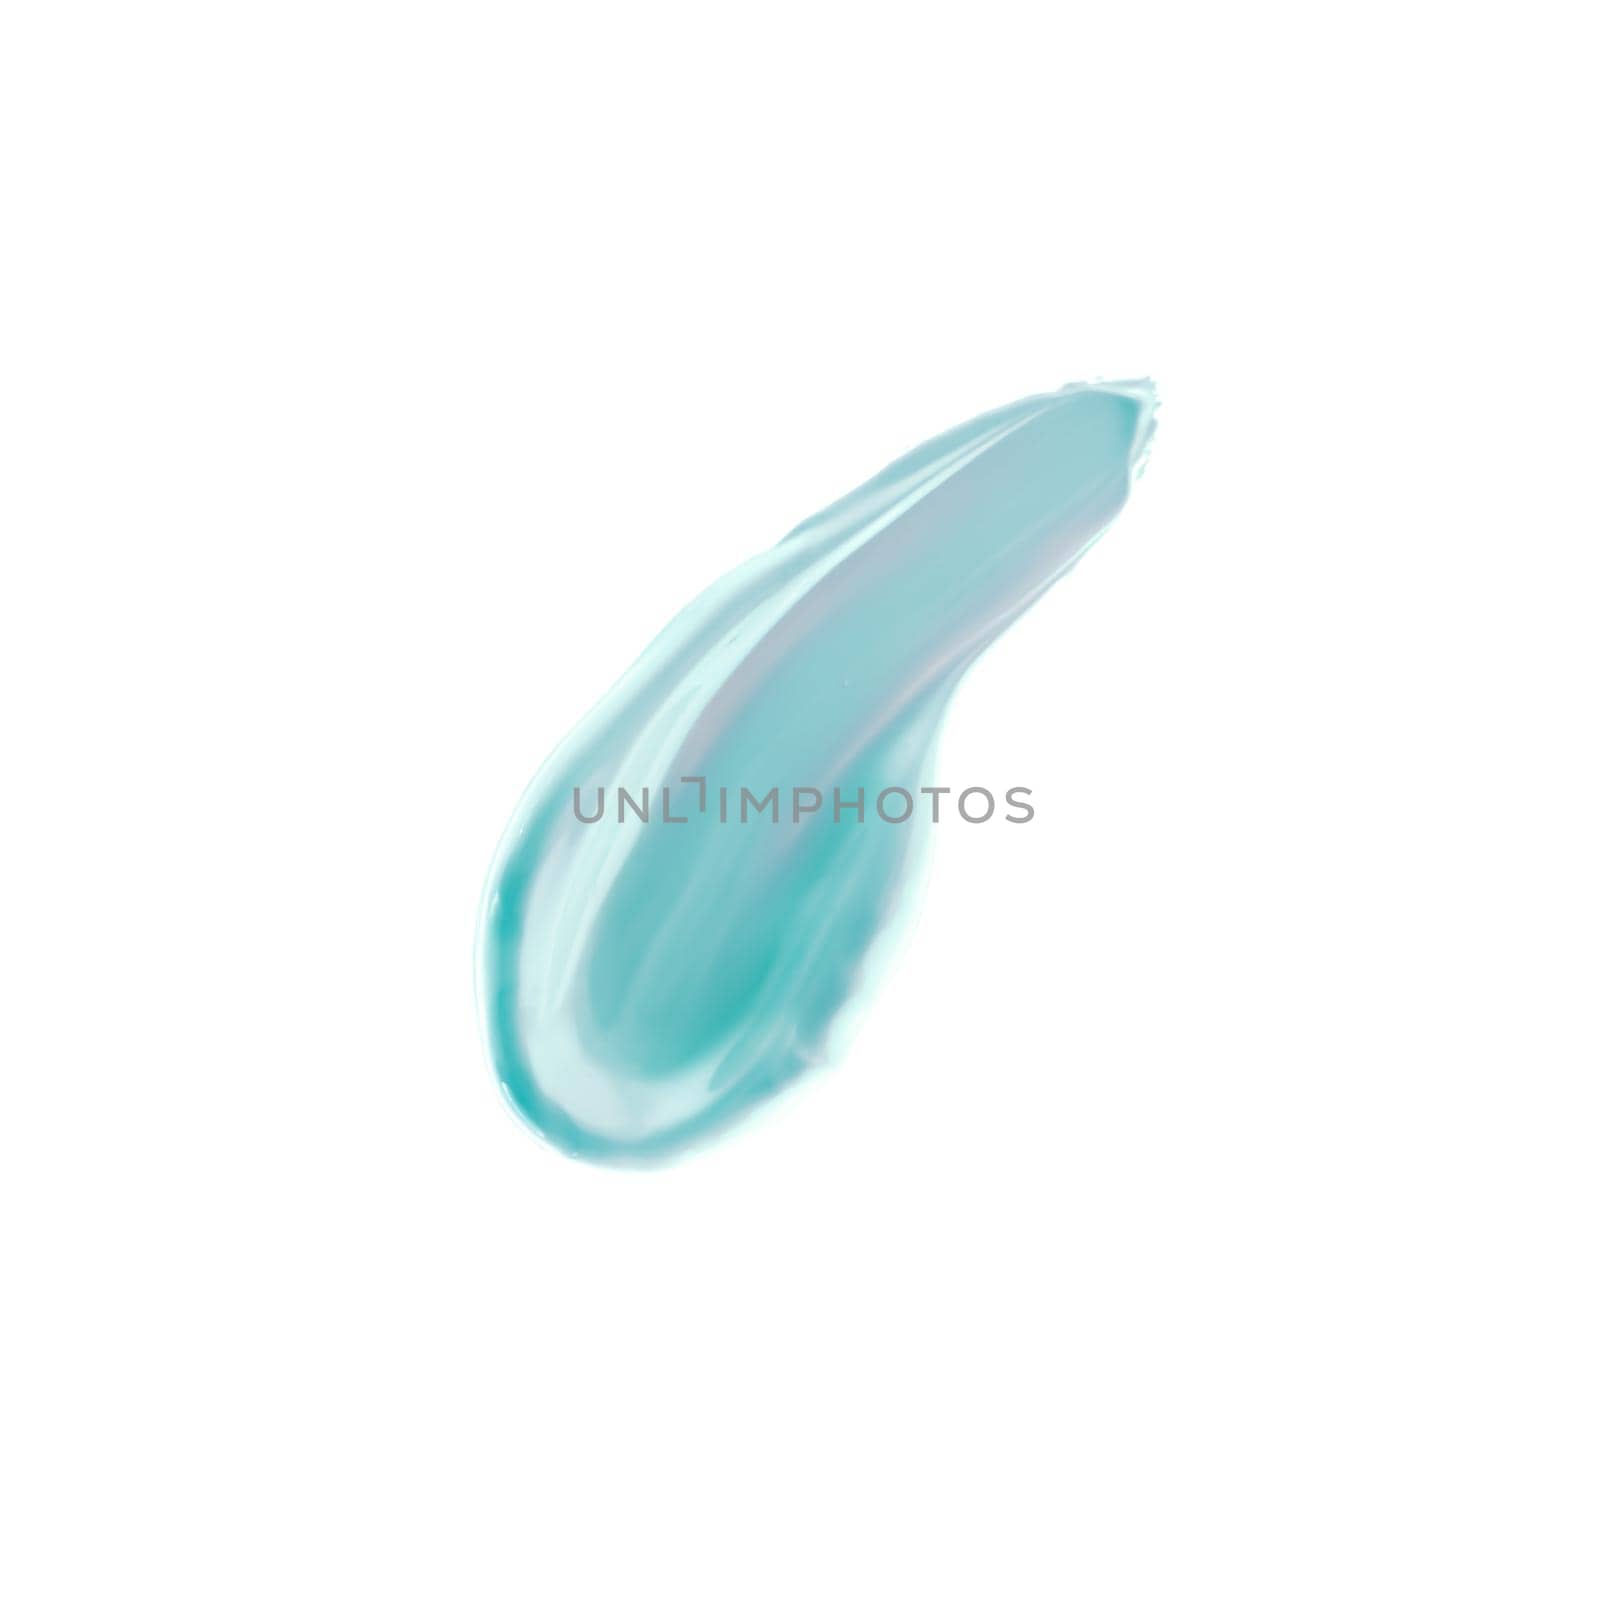 Pastel mint beauty swatch, skincare and makeup cosmetic product sample texture isolated on white background, make-up smudge, cream cosmetics smear or paint brush stroke by Anneleven